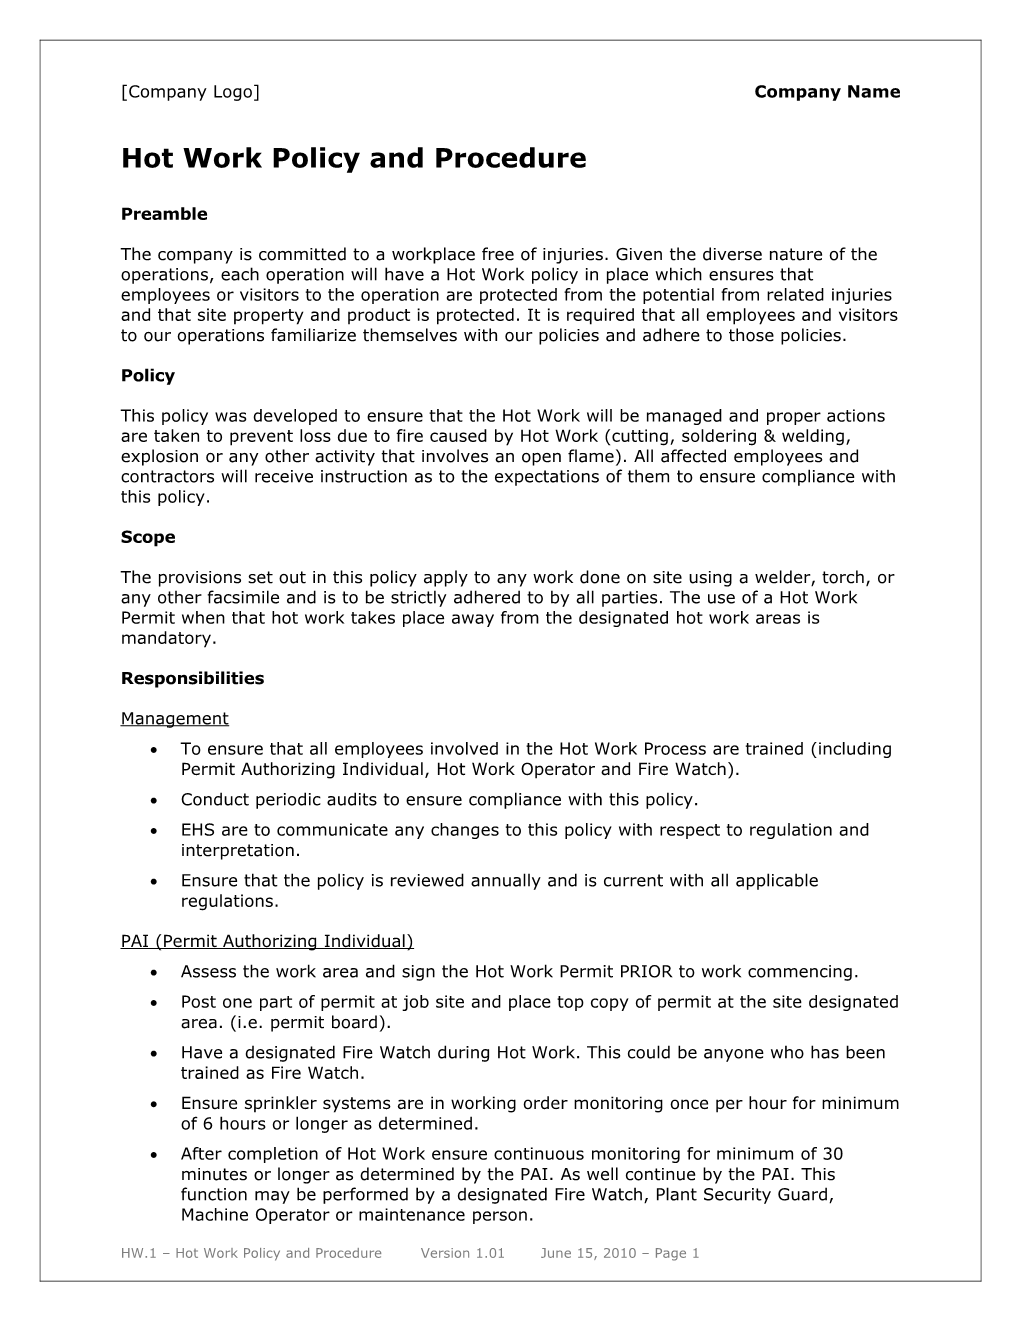 Hot Work Policy and Procedure